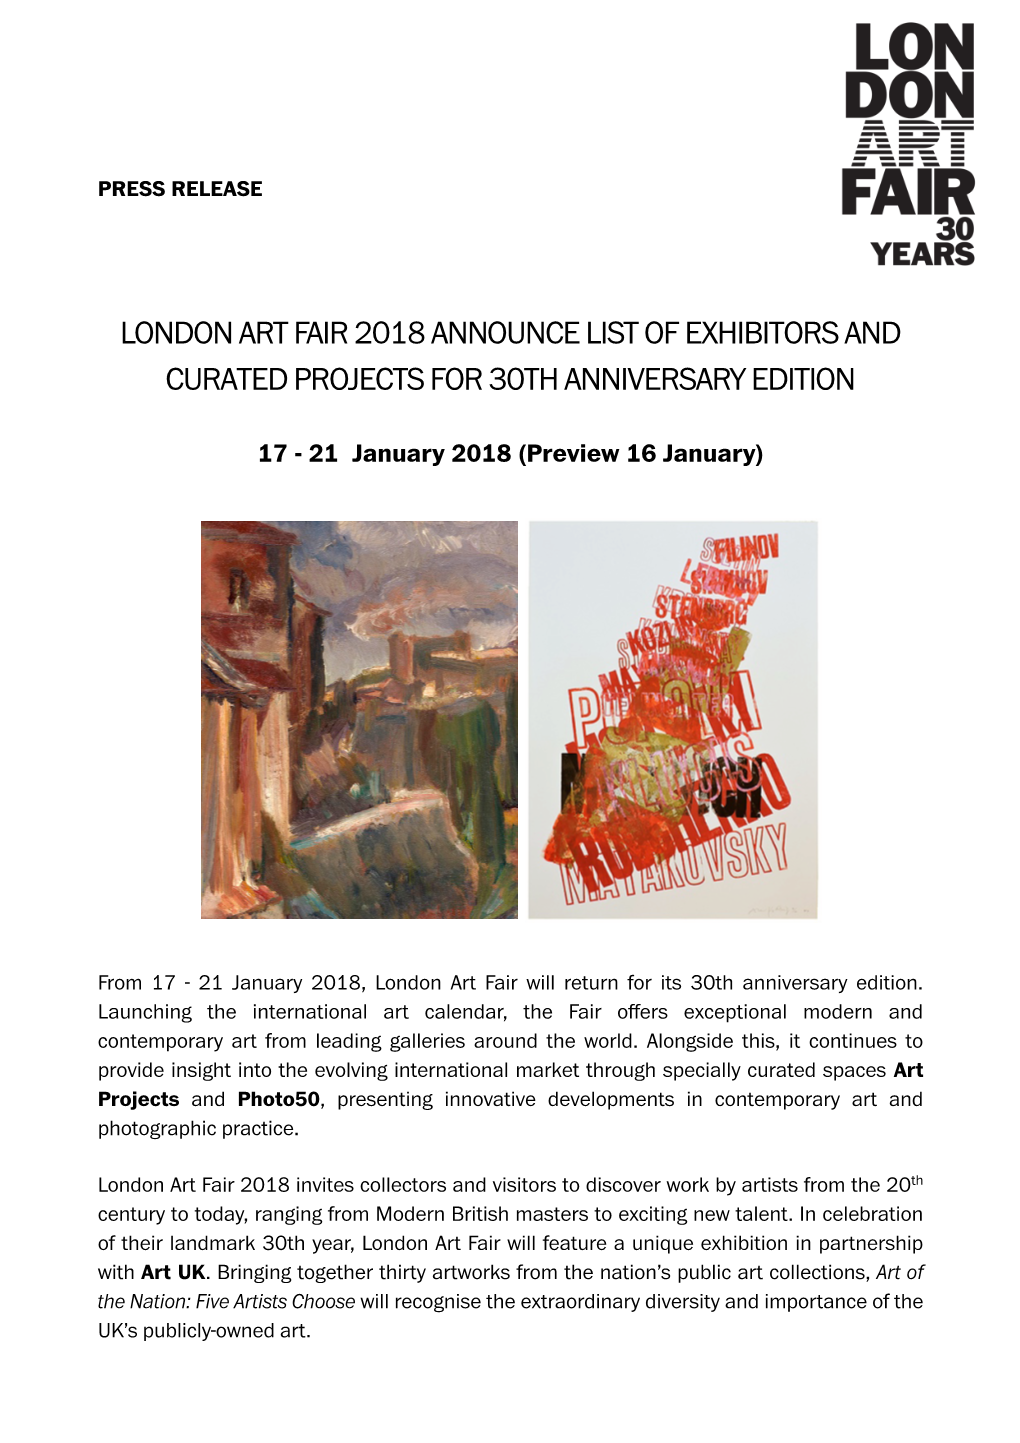 London Art Fair 2018 Announce List of Exhibitors and Curated Projects for 30Th Anniversary Edition